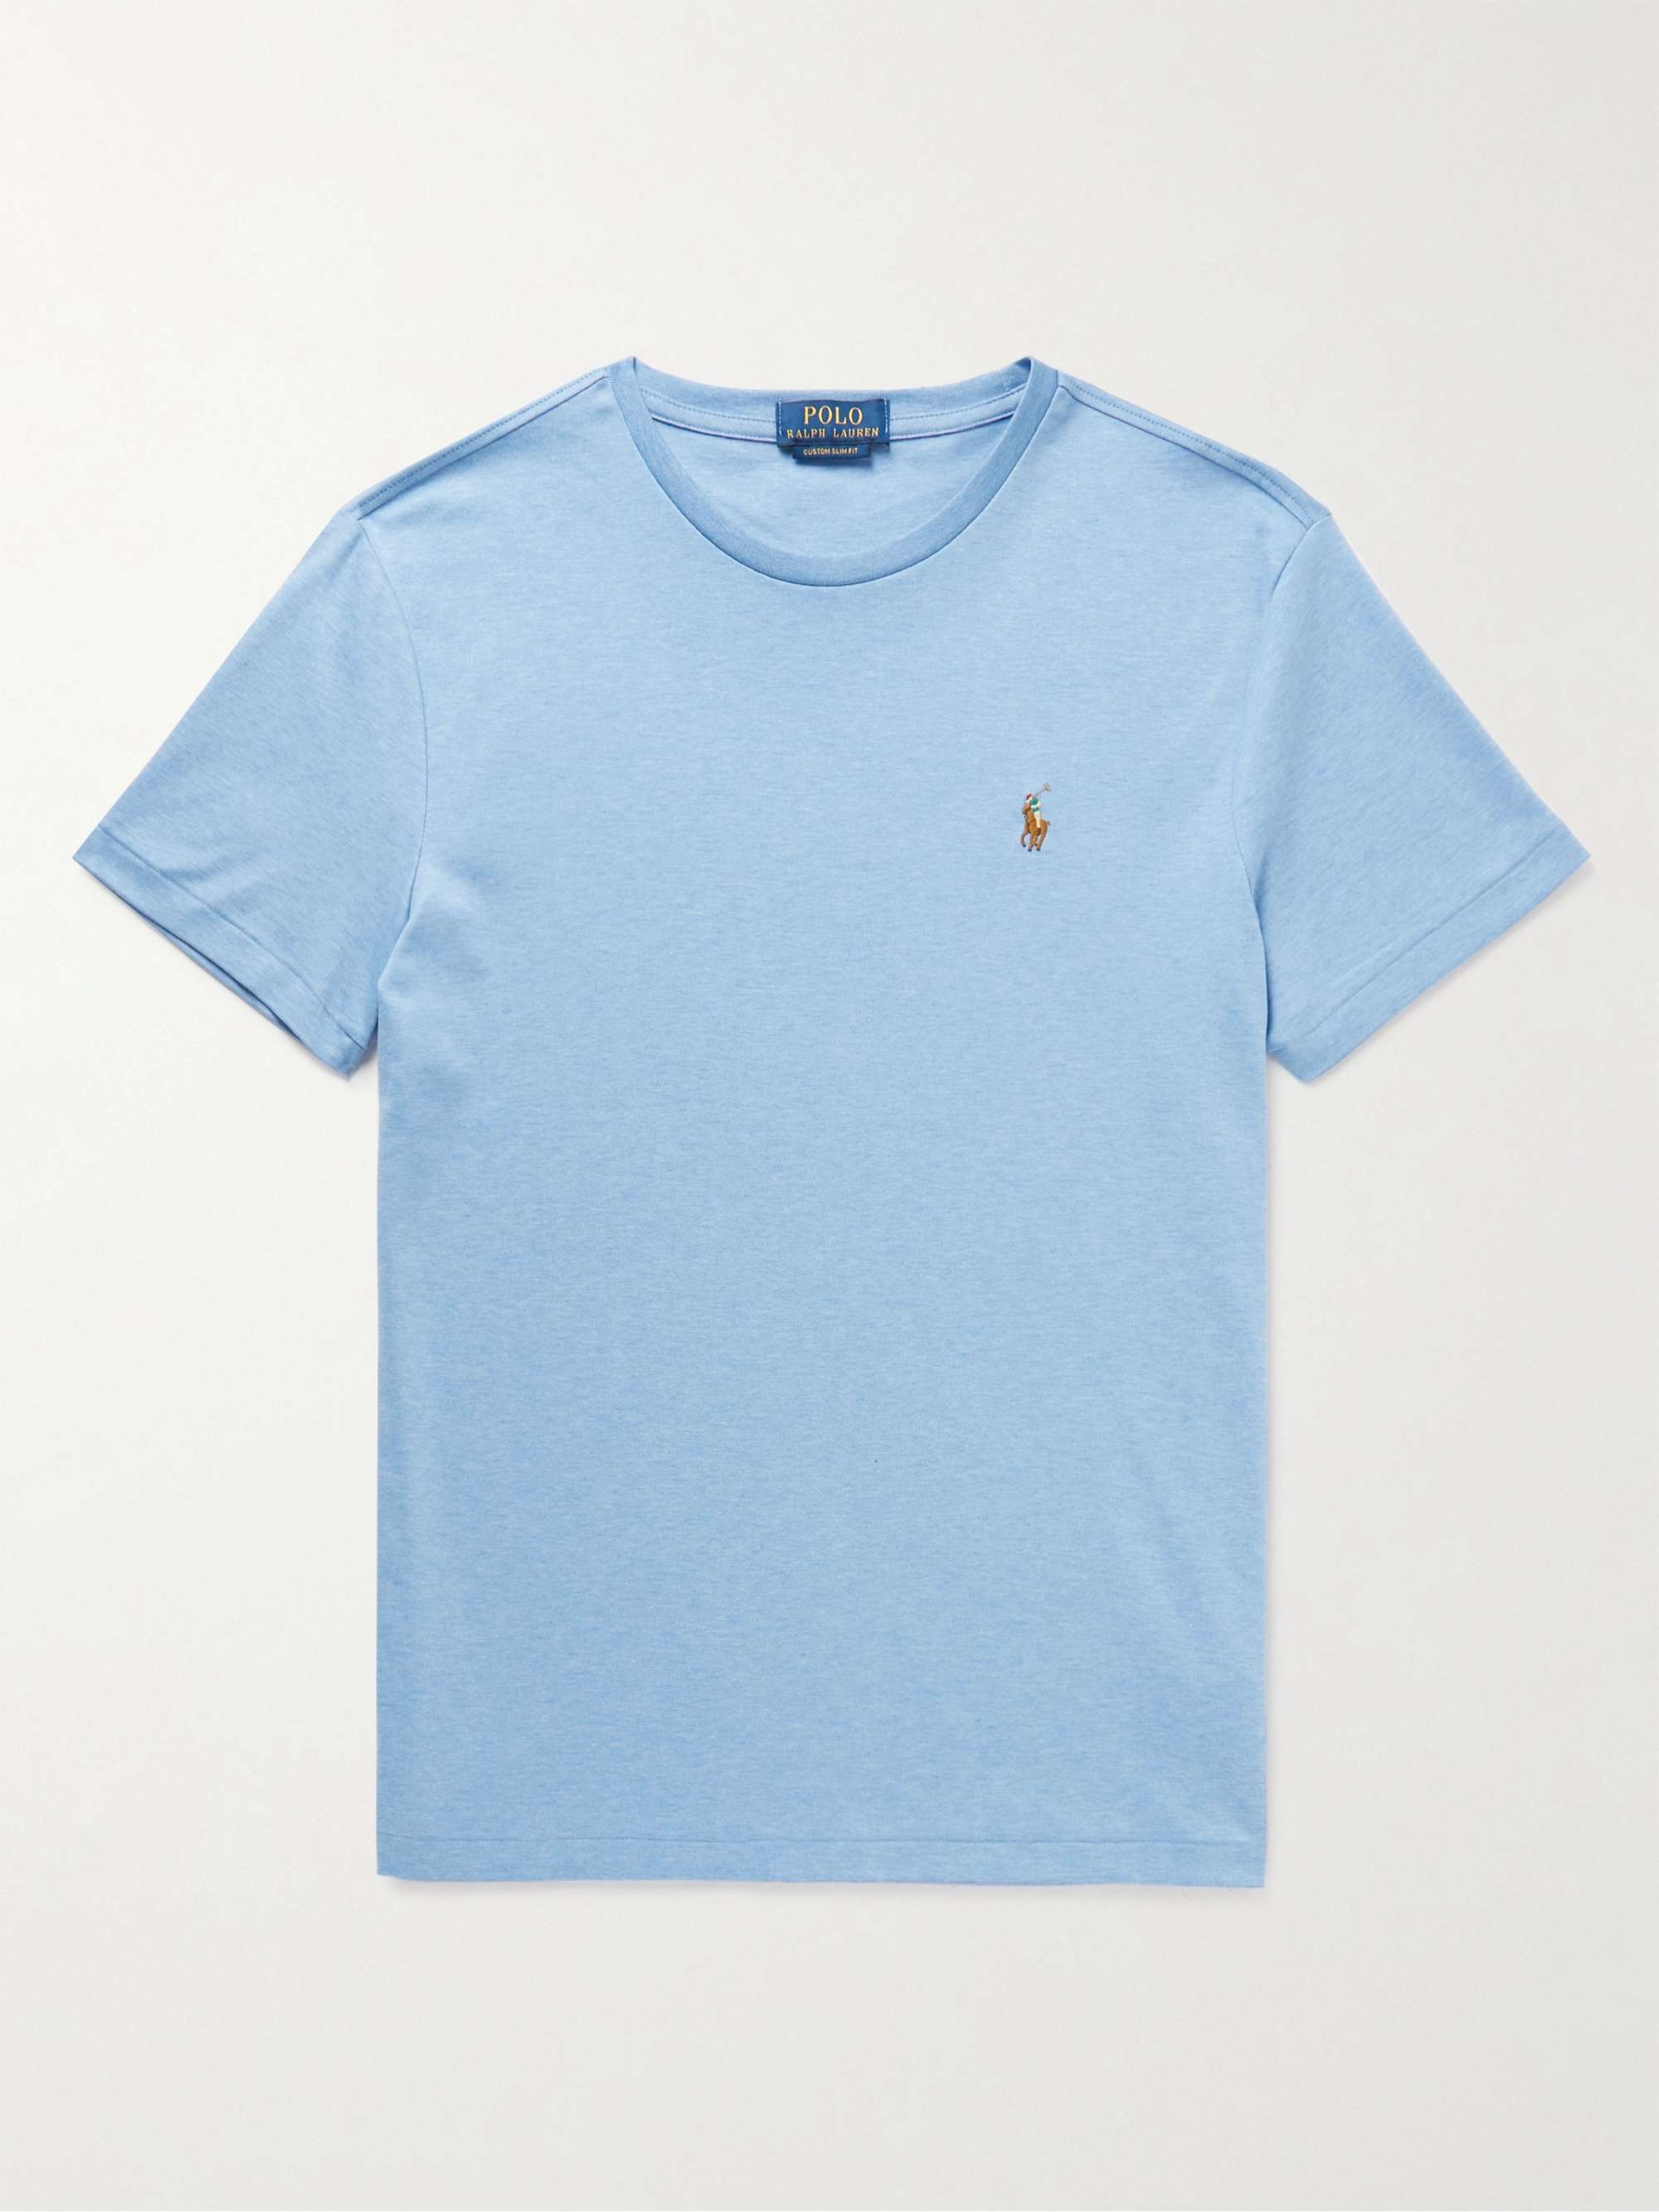 POLO RALPH LAUREN Slim-Fit Logo-Embroidered Cotton-Jersey T-Shirt